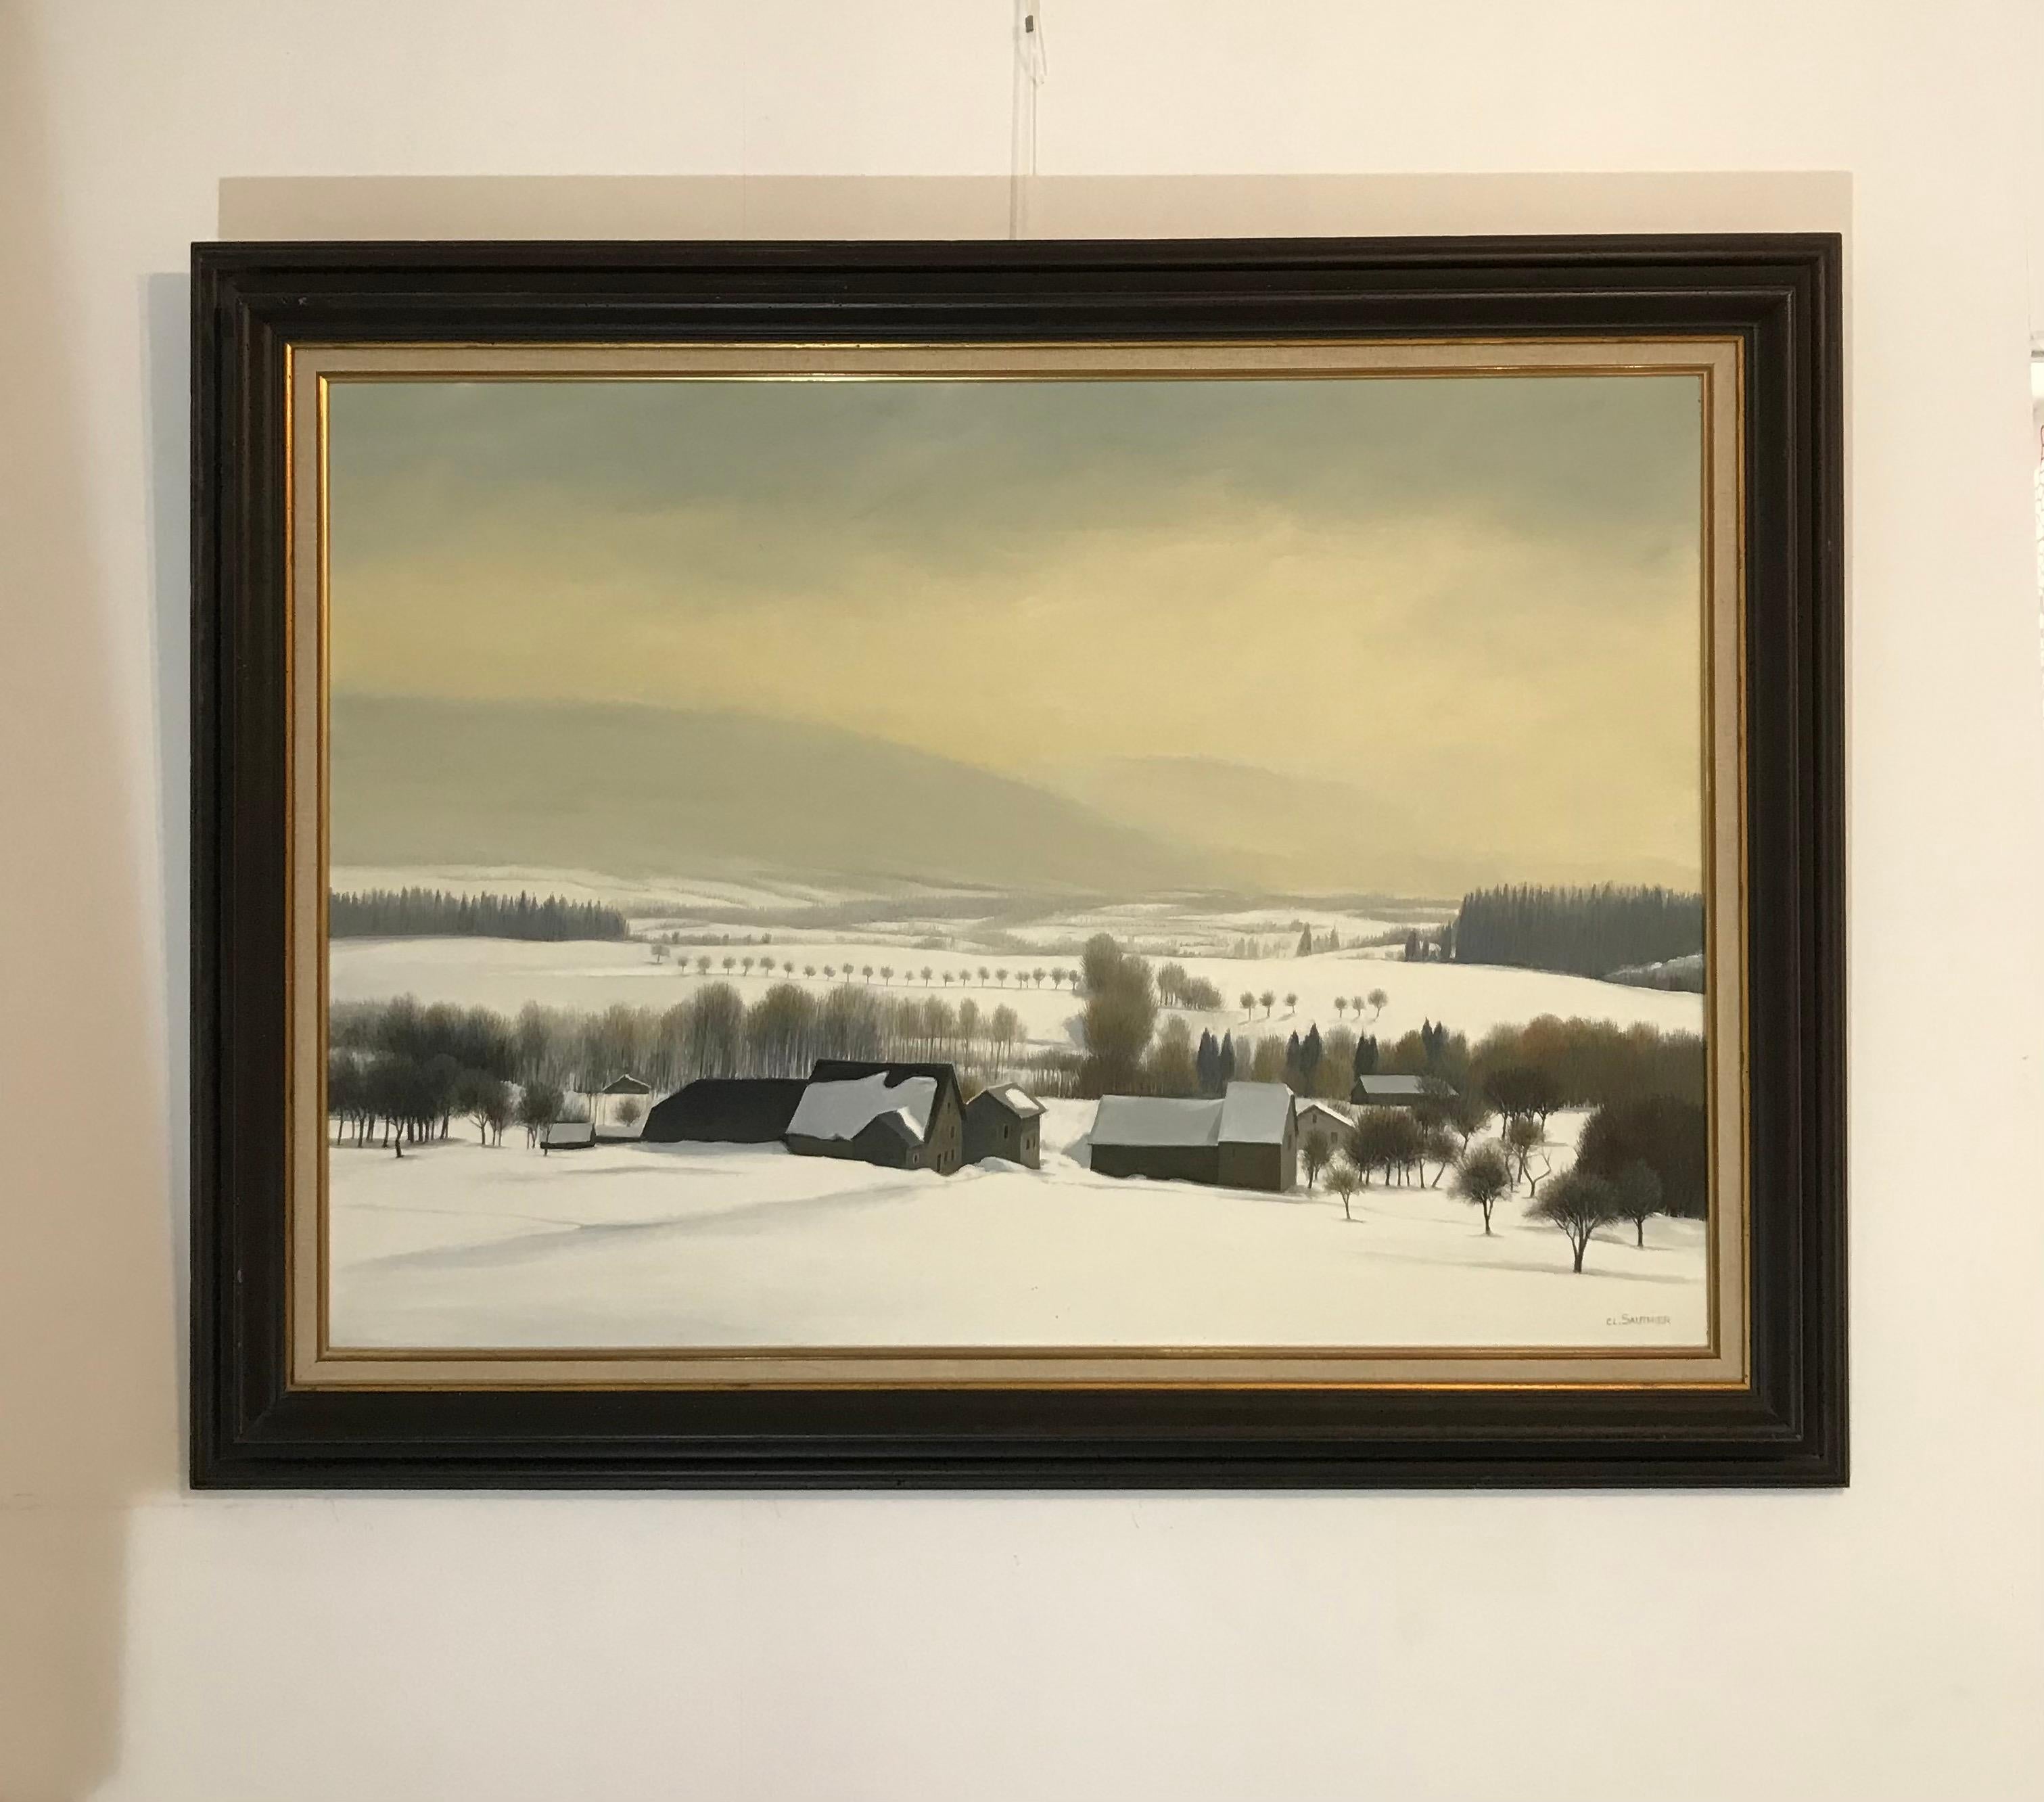 Snow as far as the eye can see - Painting by Claude Sauthier